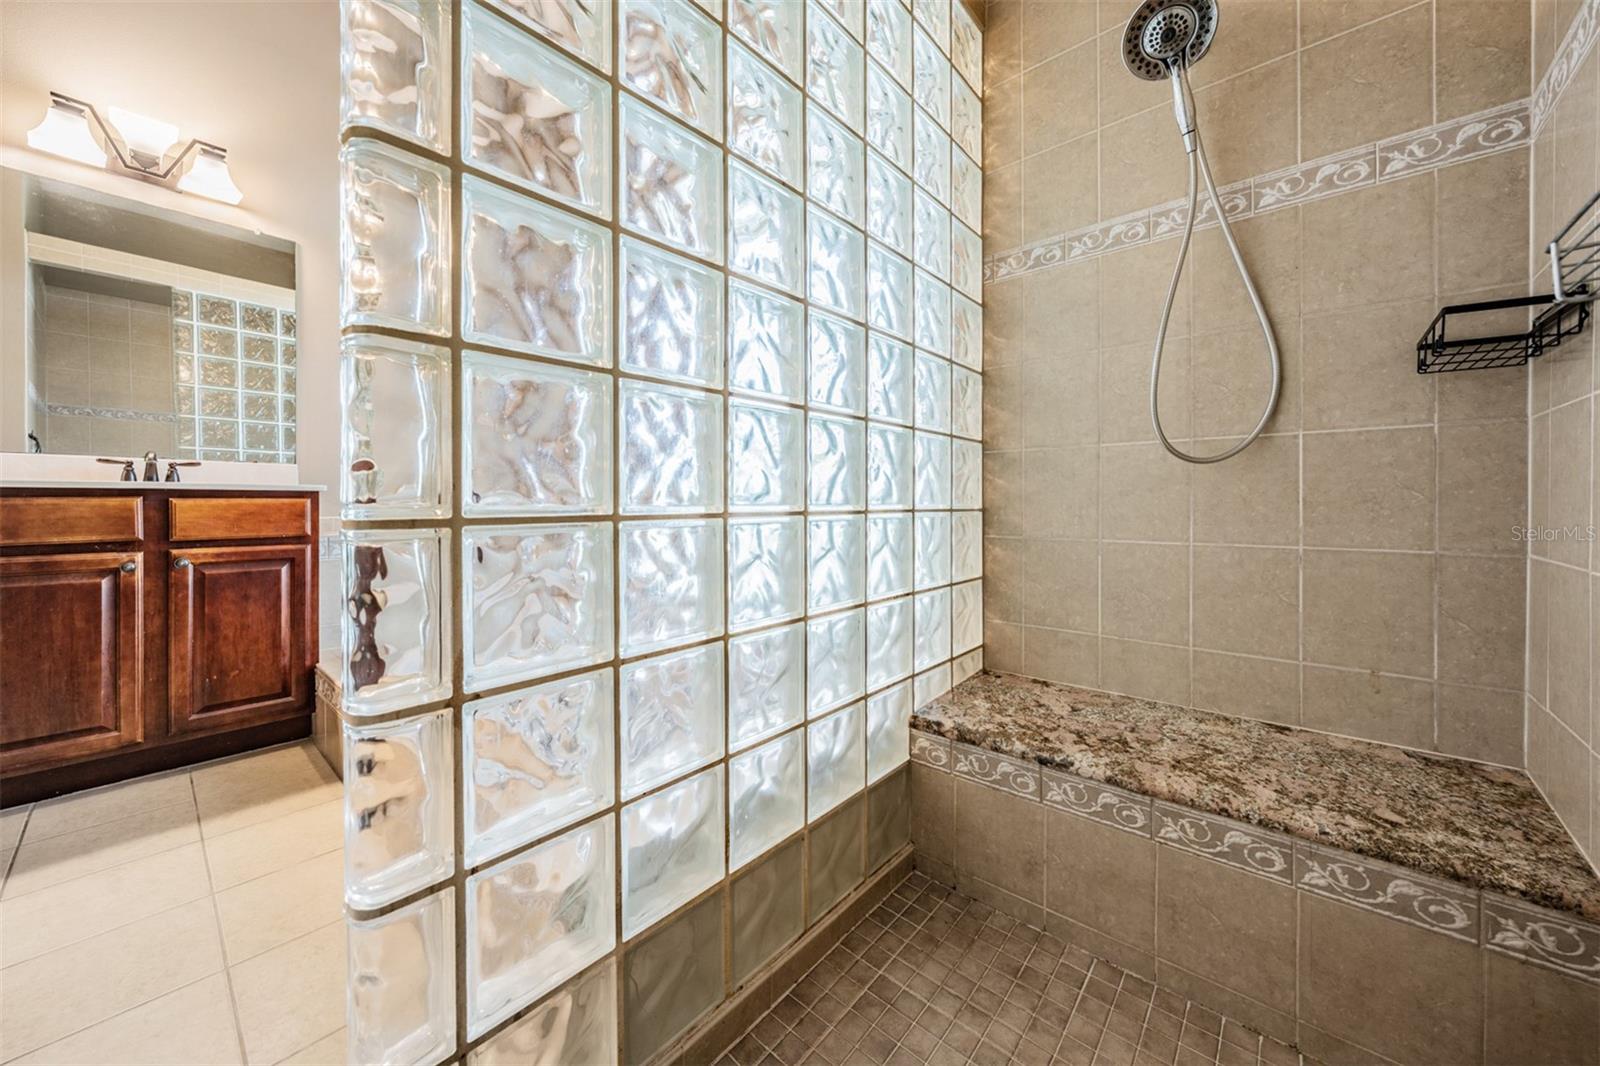 Glass block adds natural light to walk in shower